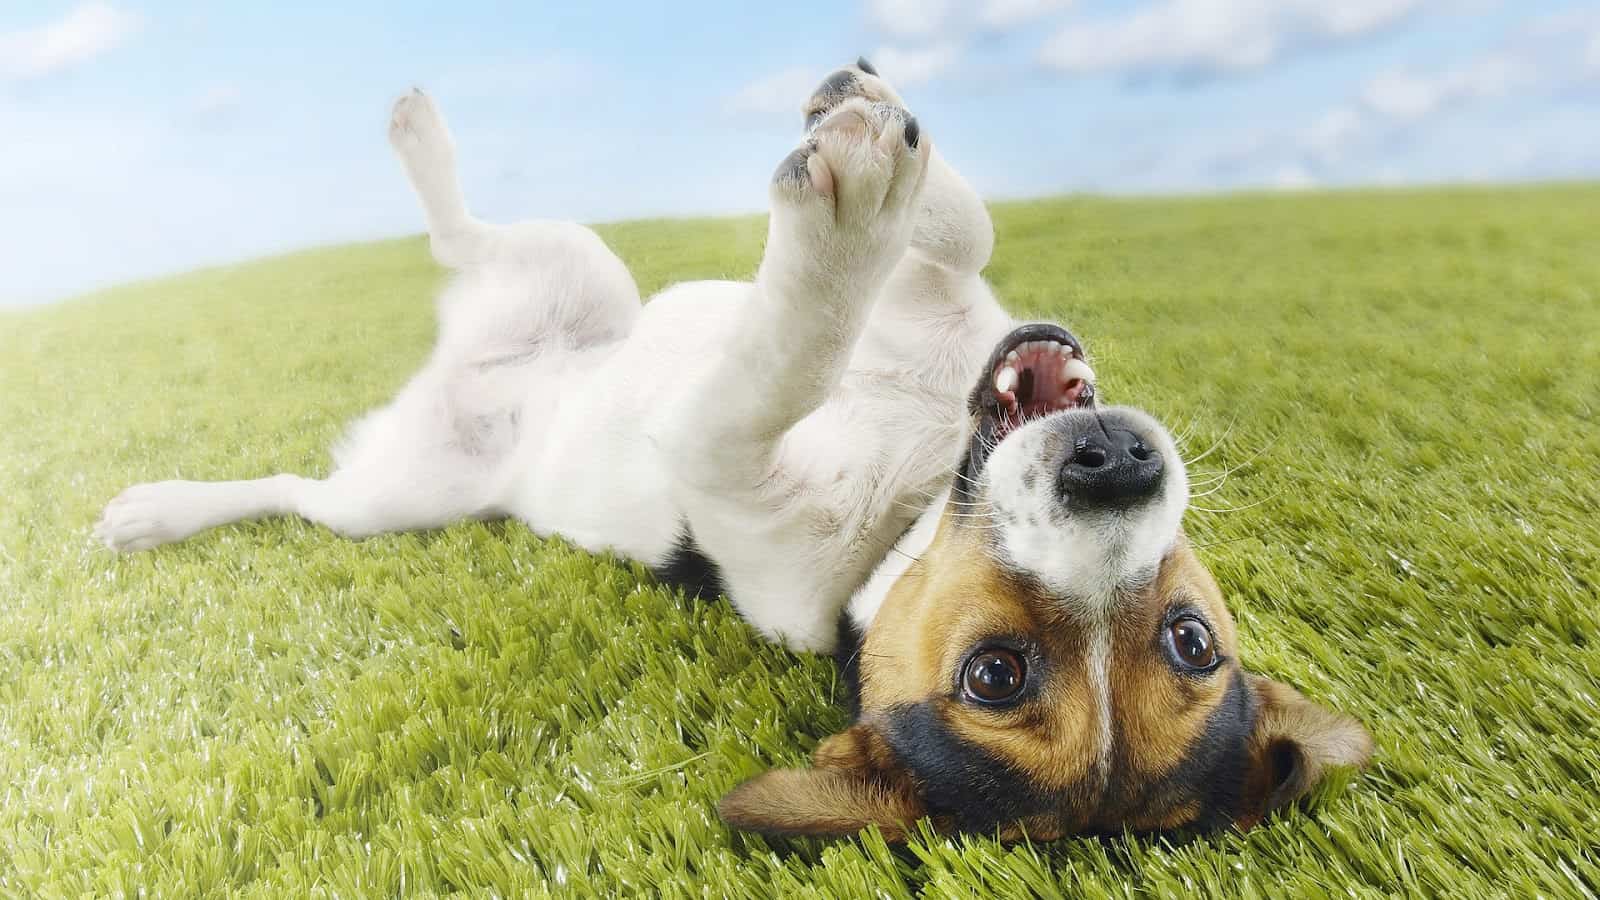 Cleaning Artificial Grass When You Have Dogs | What You Need to Know